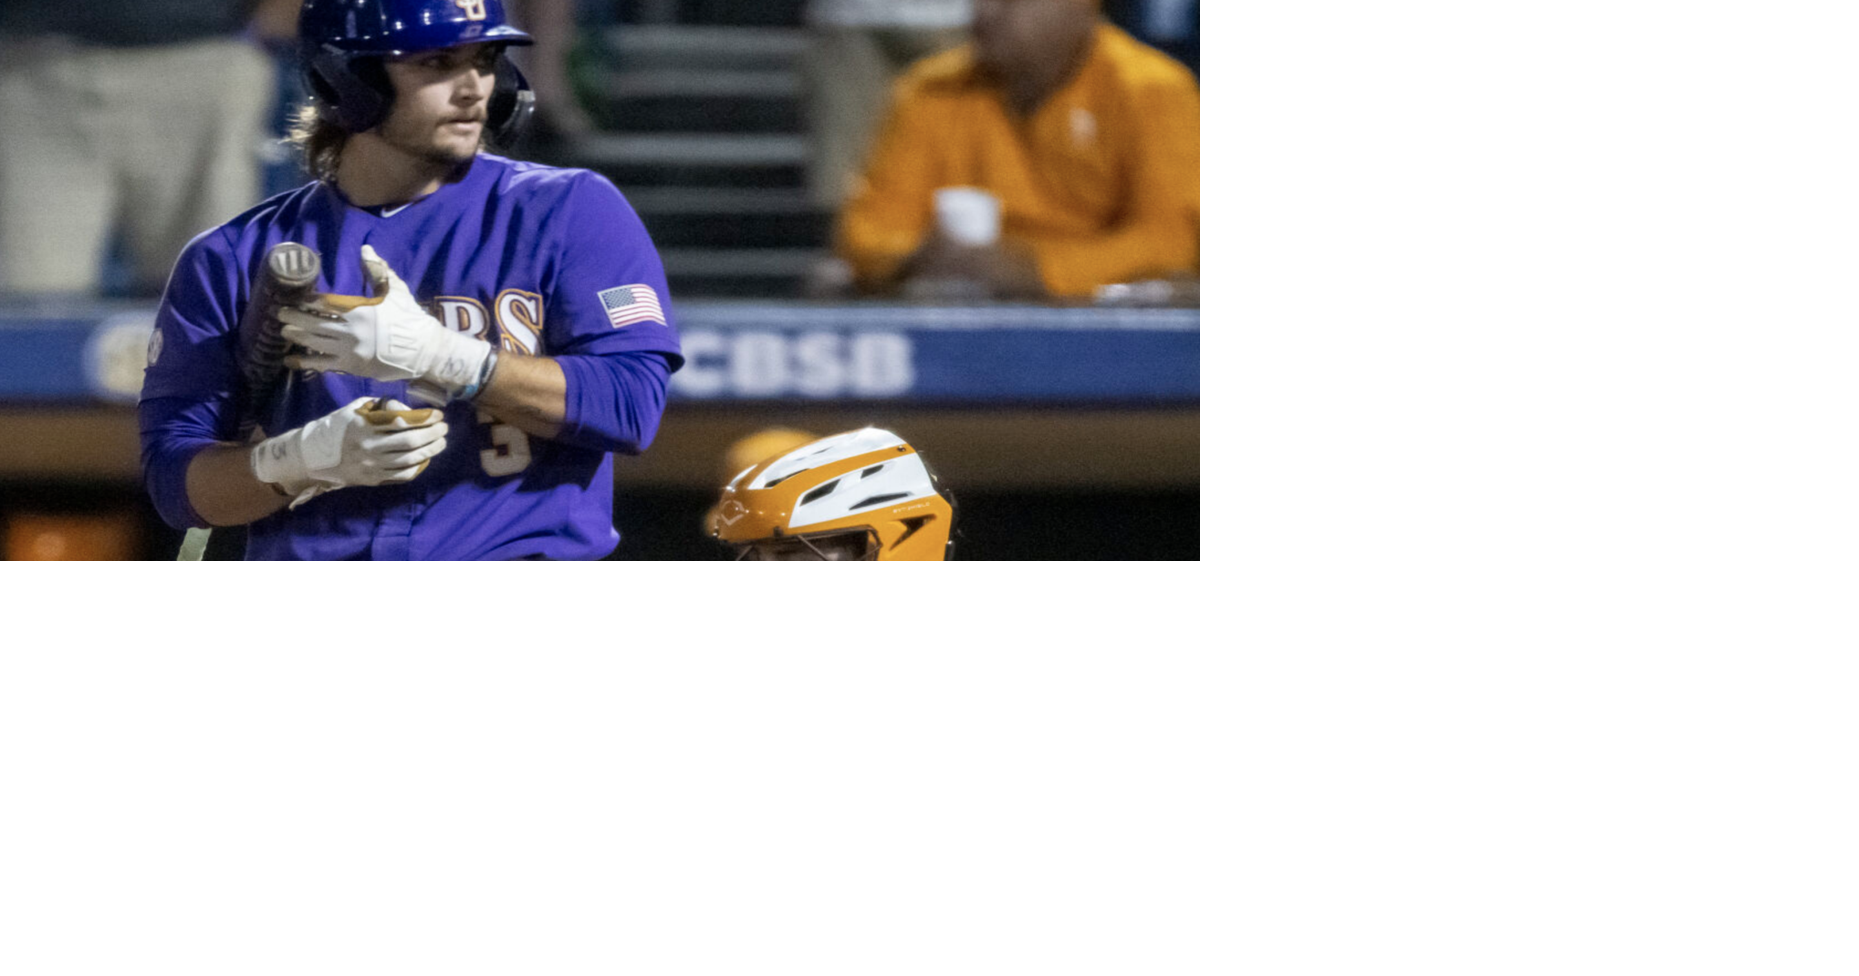 LSU hoping to capitalize on strong road performances in Hattiesburg Regional